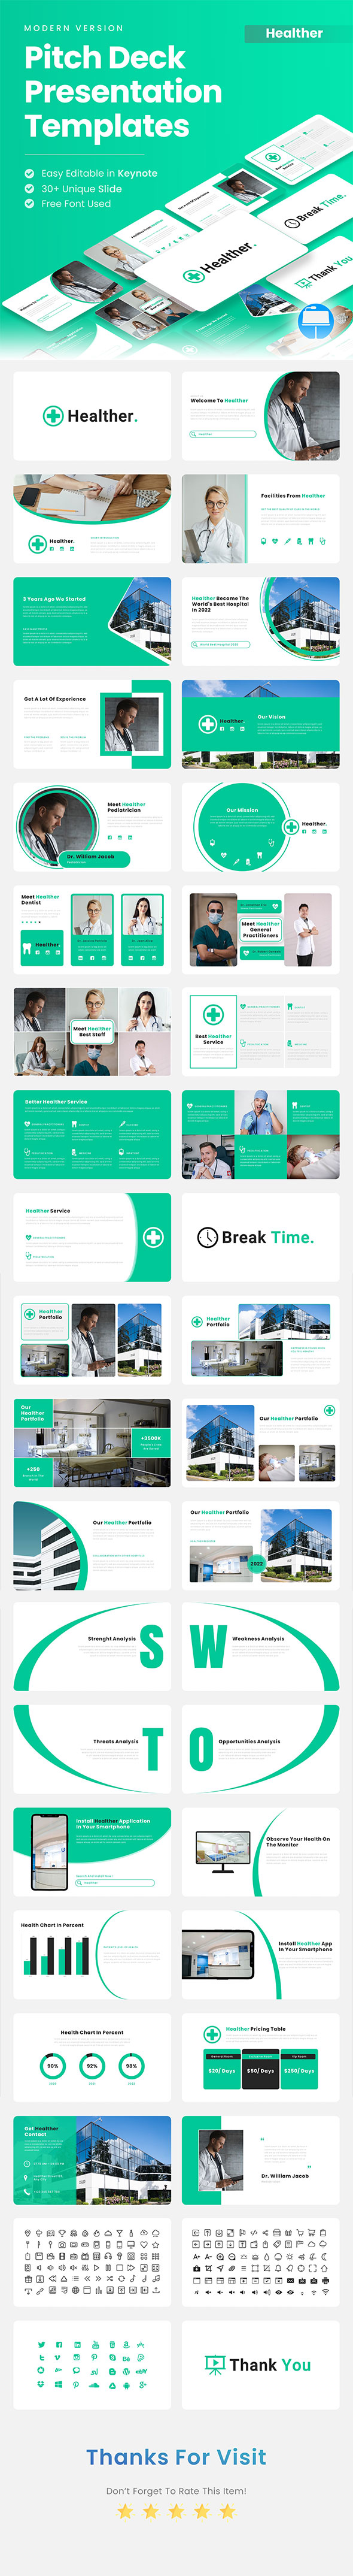 HEALTHER - Modern Healthcare Keynote Template